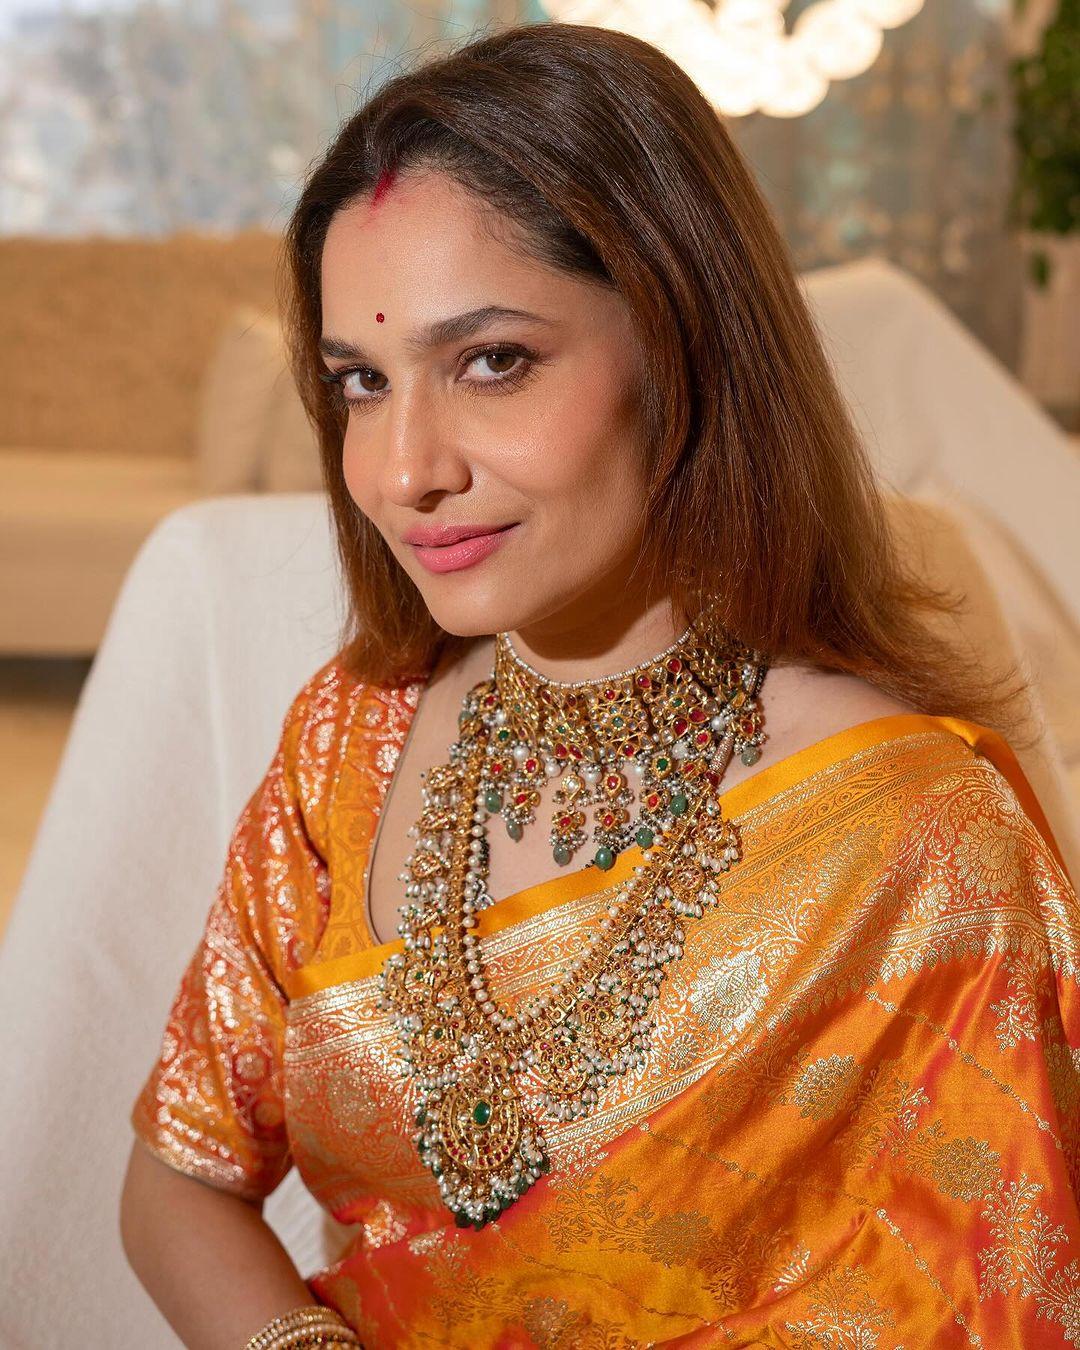 By leaving her hair open and putting on minimal makeup, Ankita let her natural beauty shine. Ankita wore heavy jewellery and multiple matching bangles to finish her look